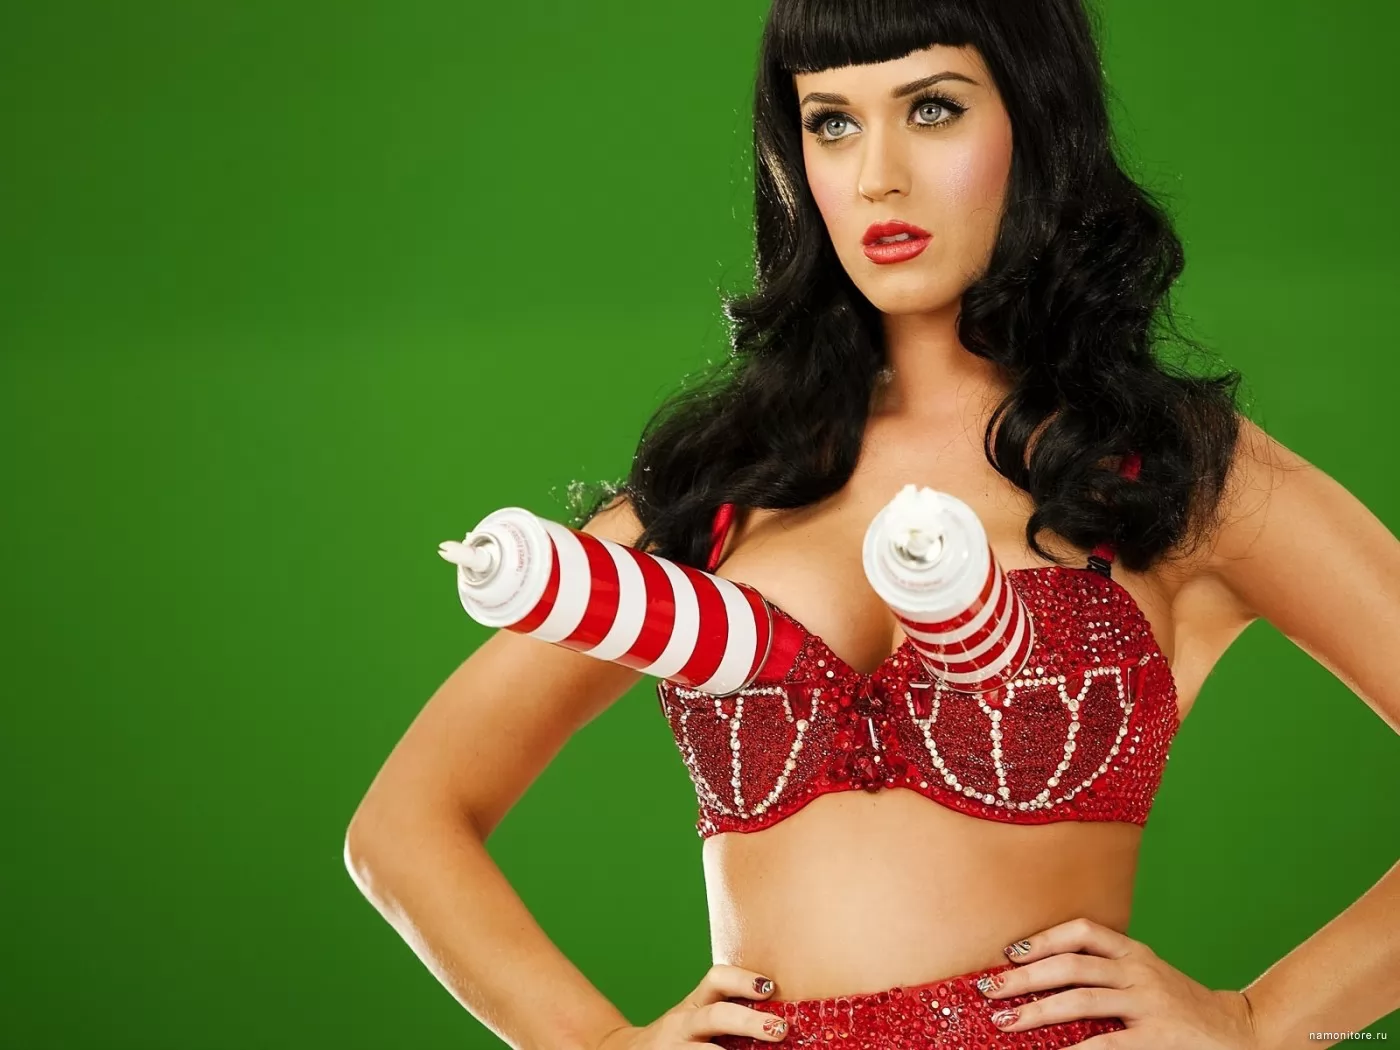 Katy Perry, brunettes, celebrities, girls, green, Katy Perry x